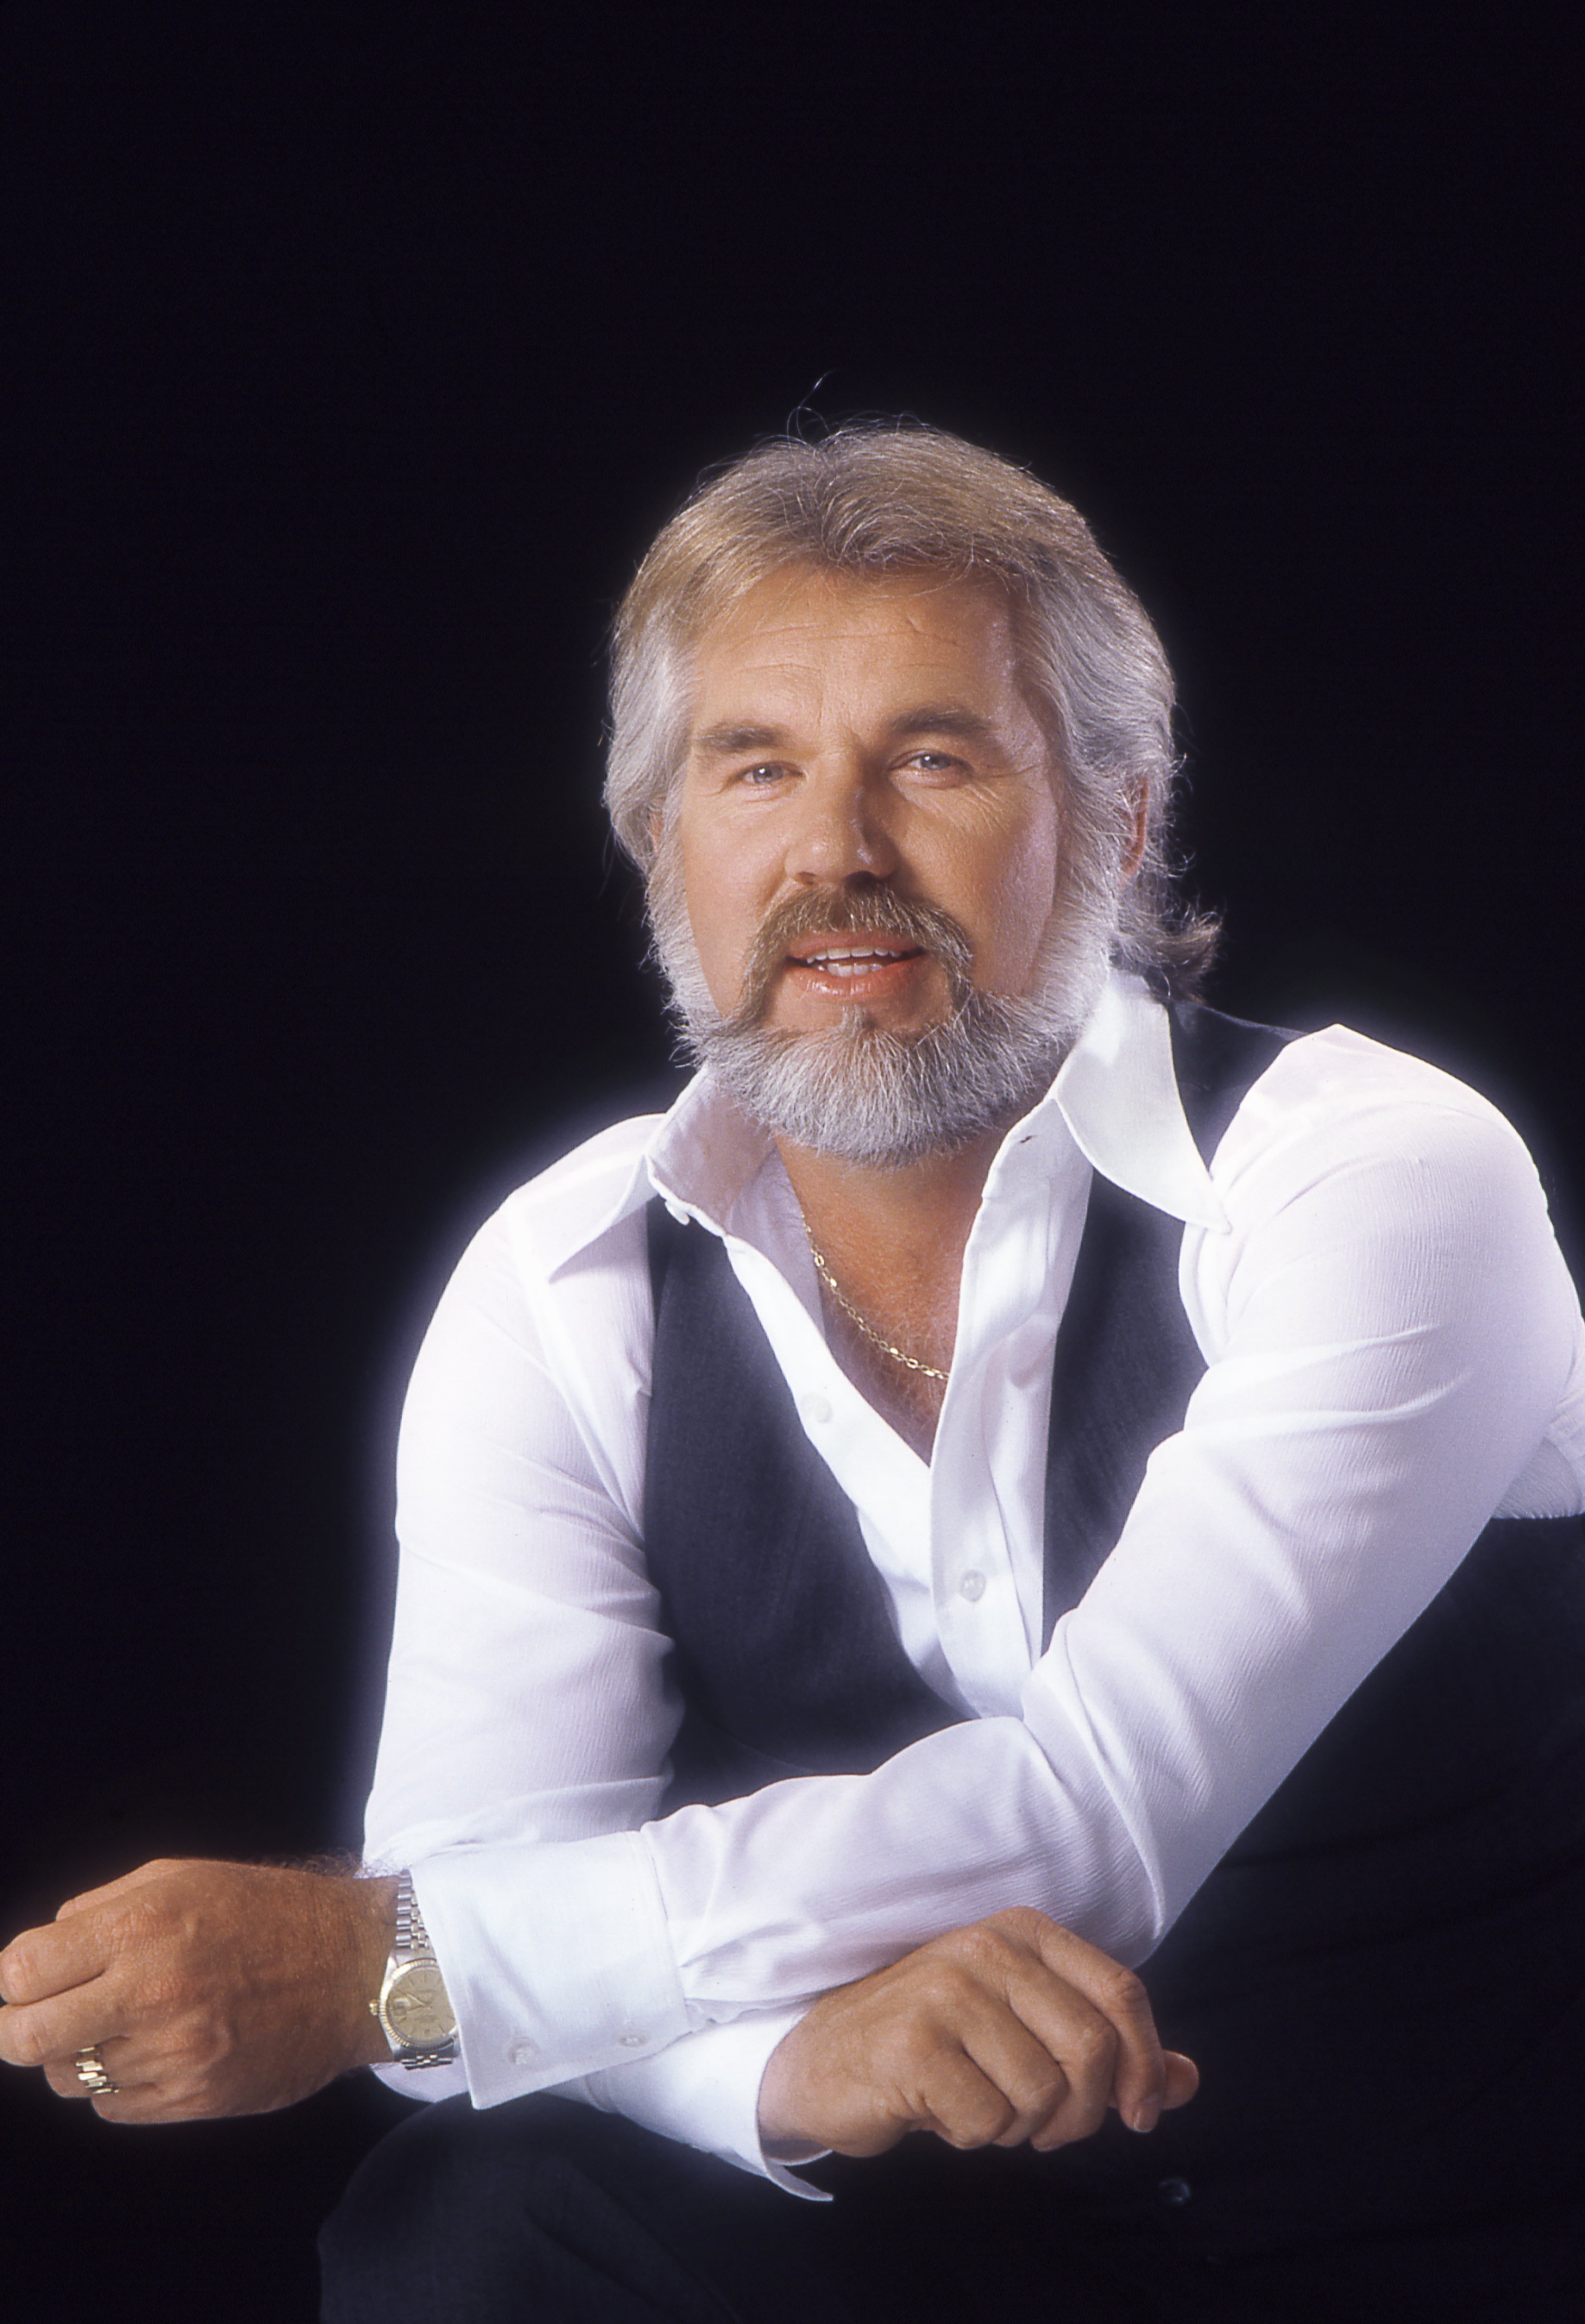 Singer Kenny Rogers poses for a portrait in 1979  | Source: Getty Images